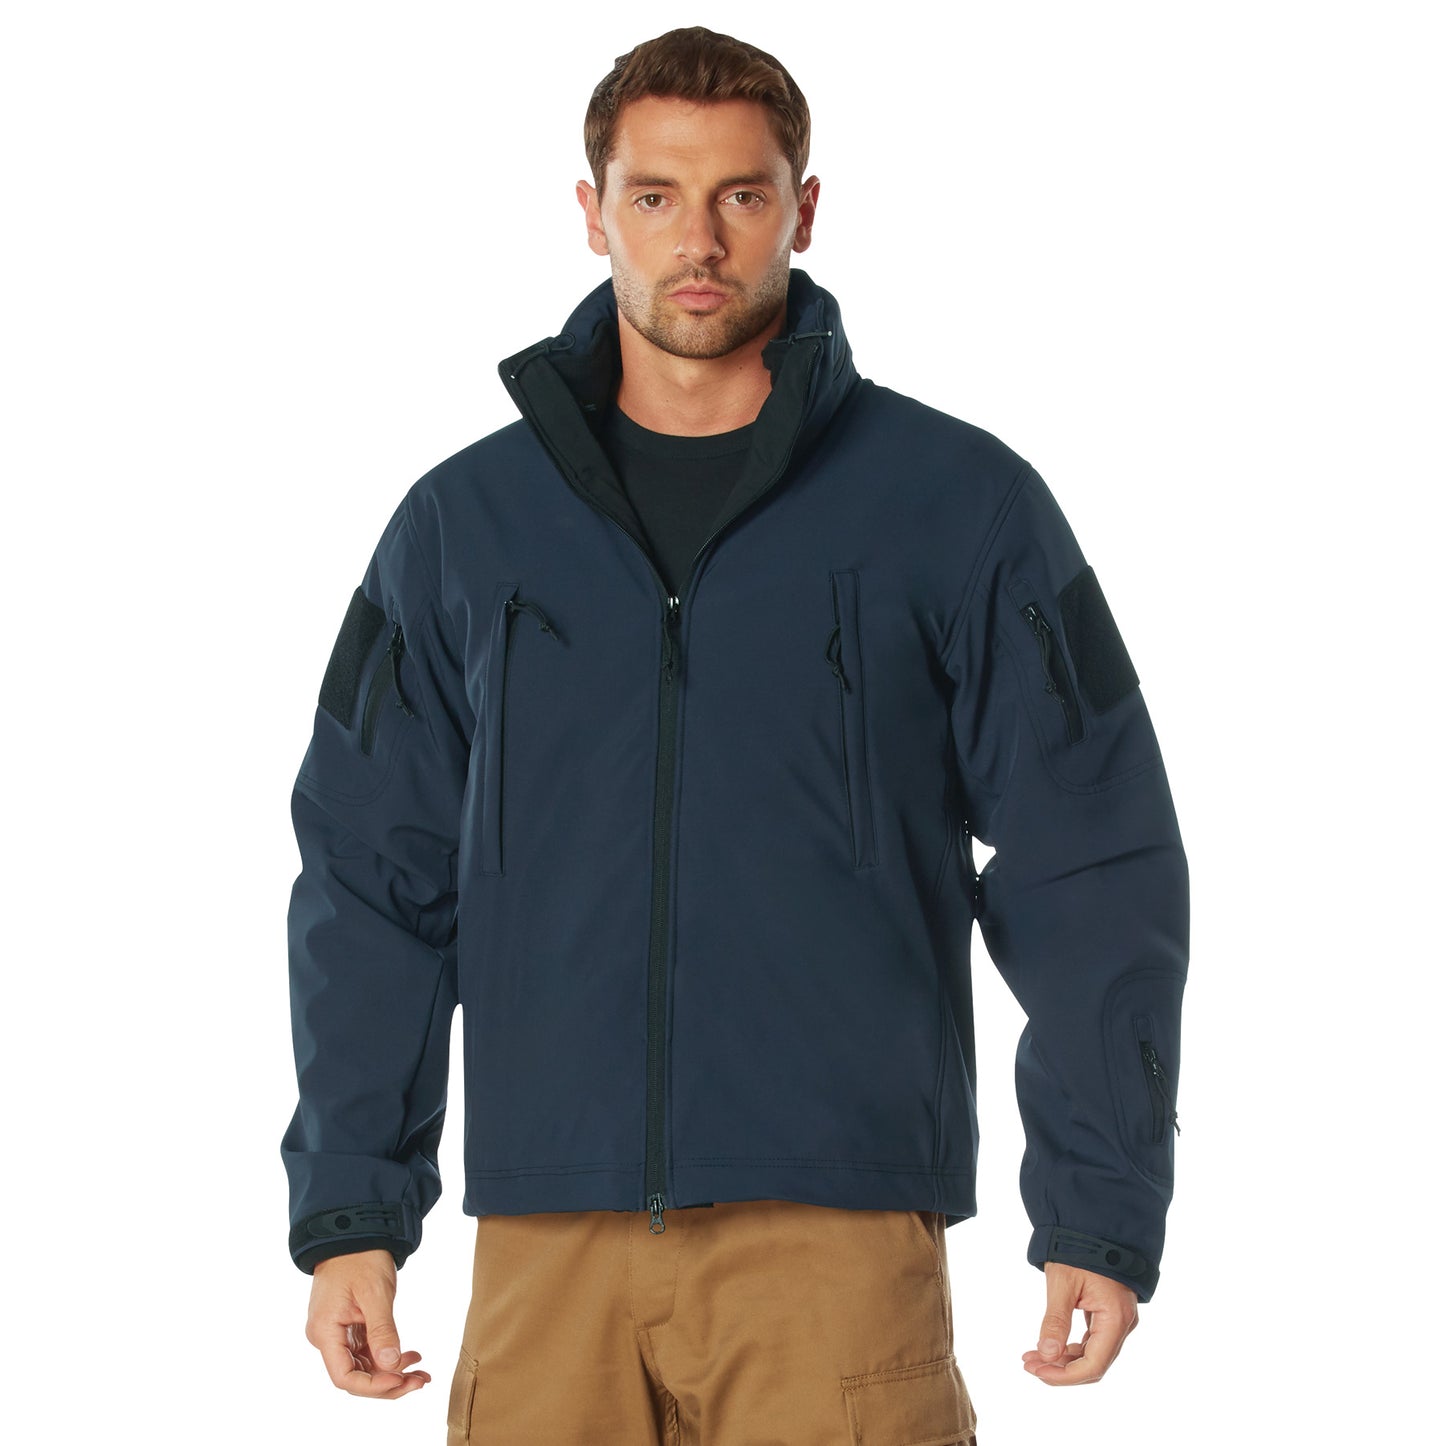 Rothco 3 in 1 Spec Ops Soft Shell Jacket